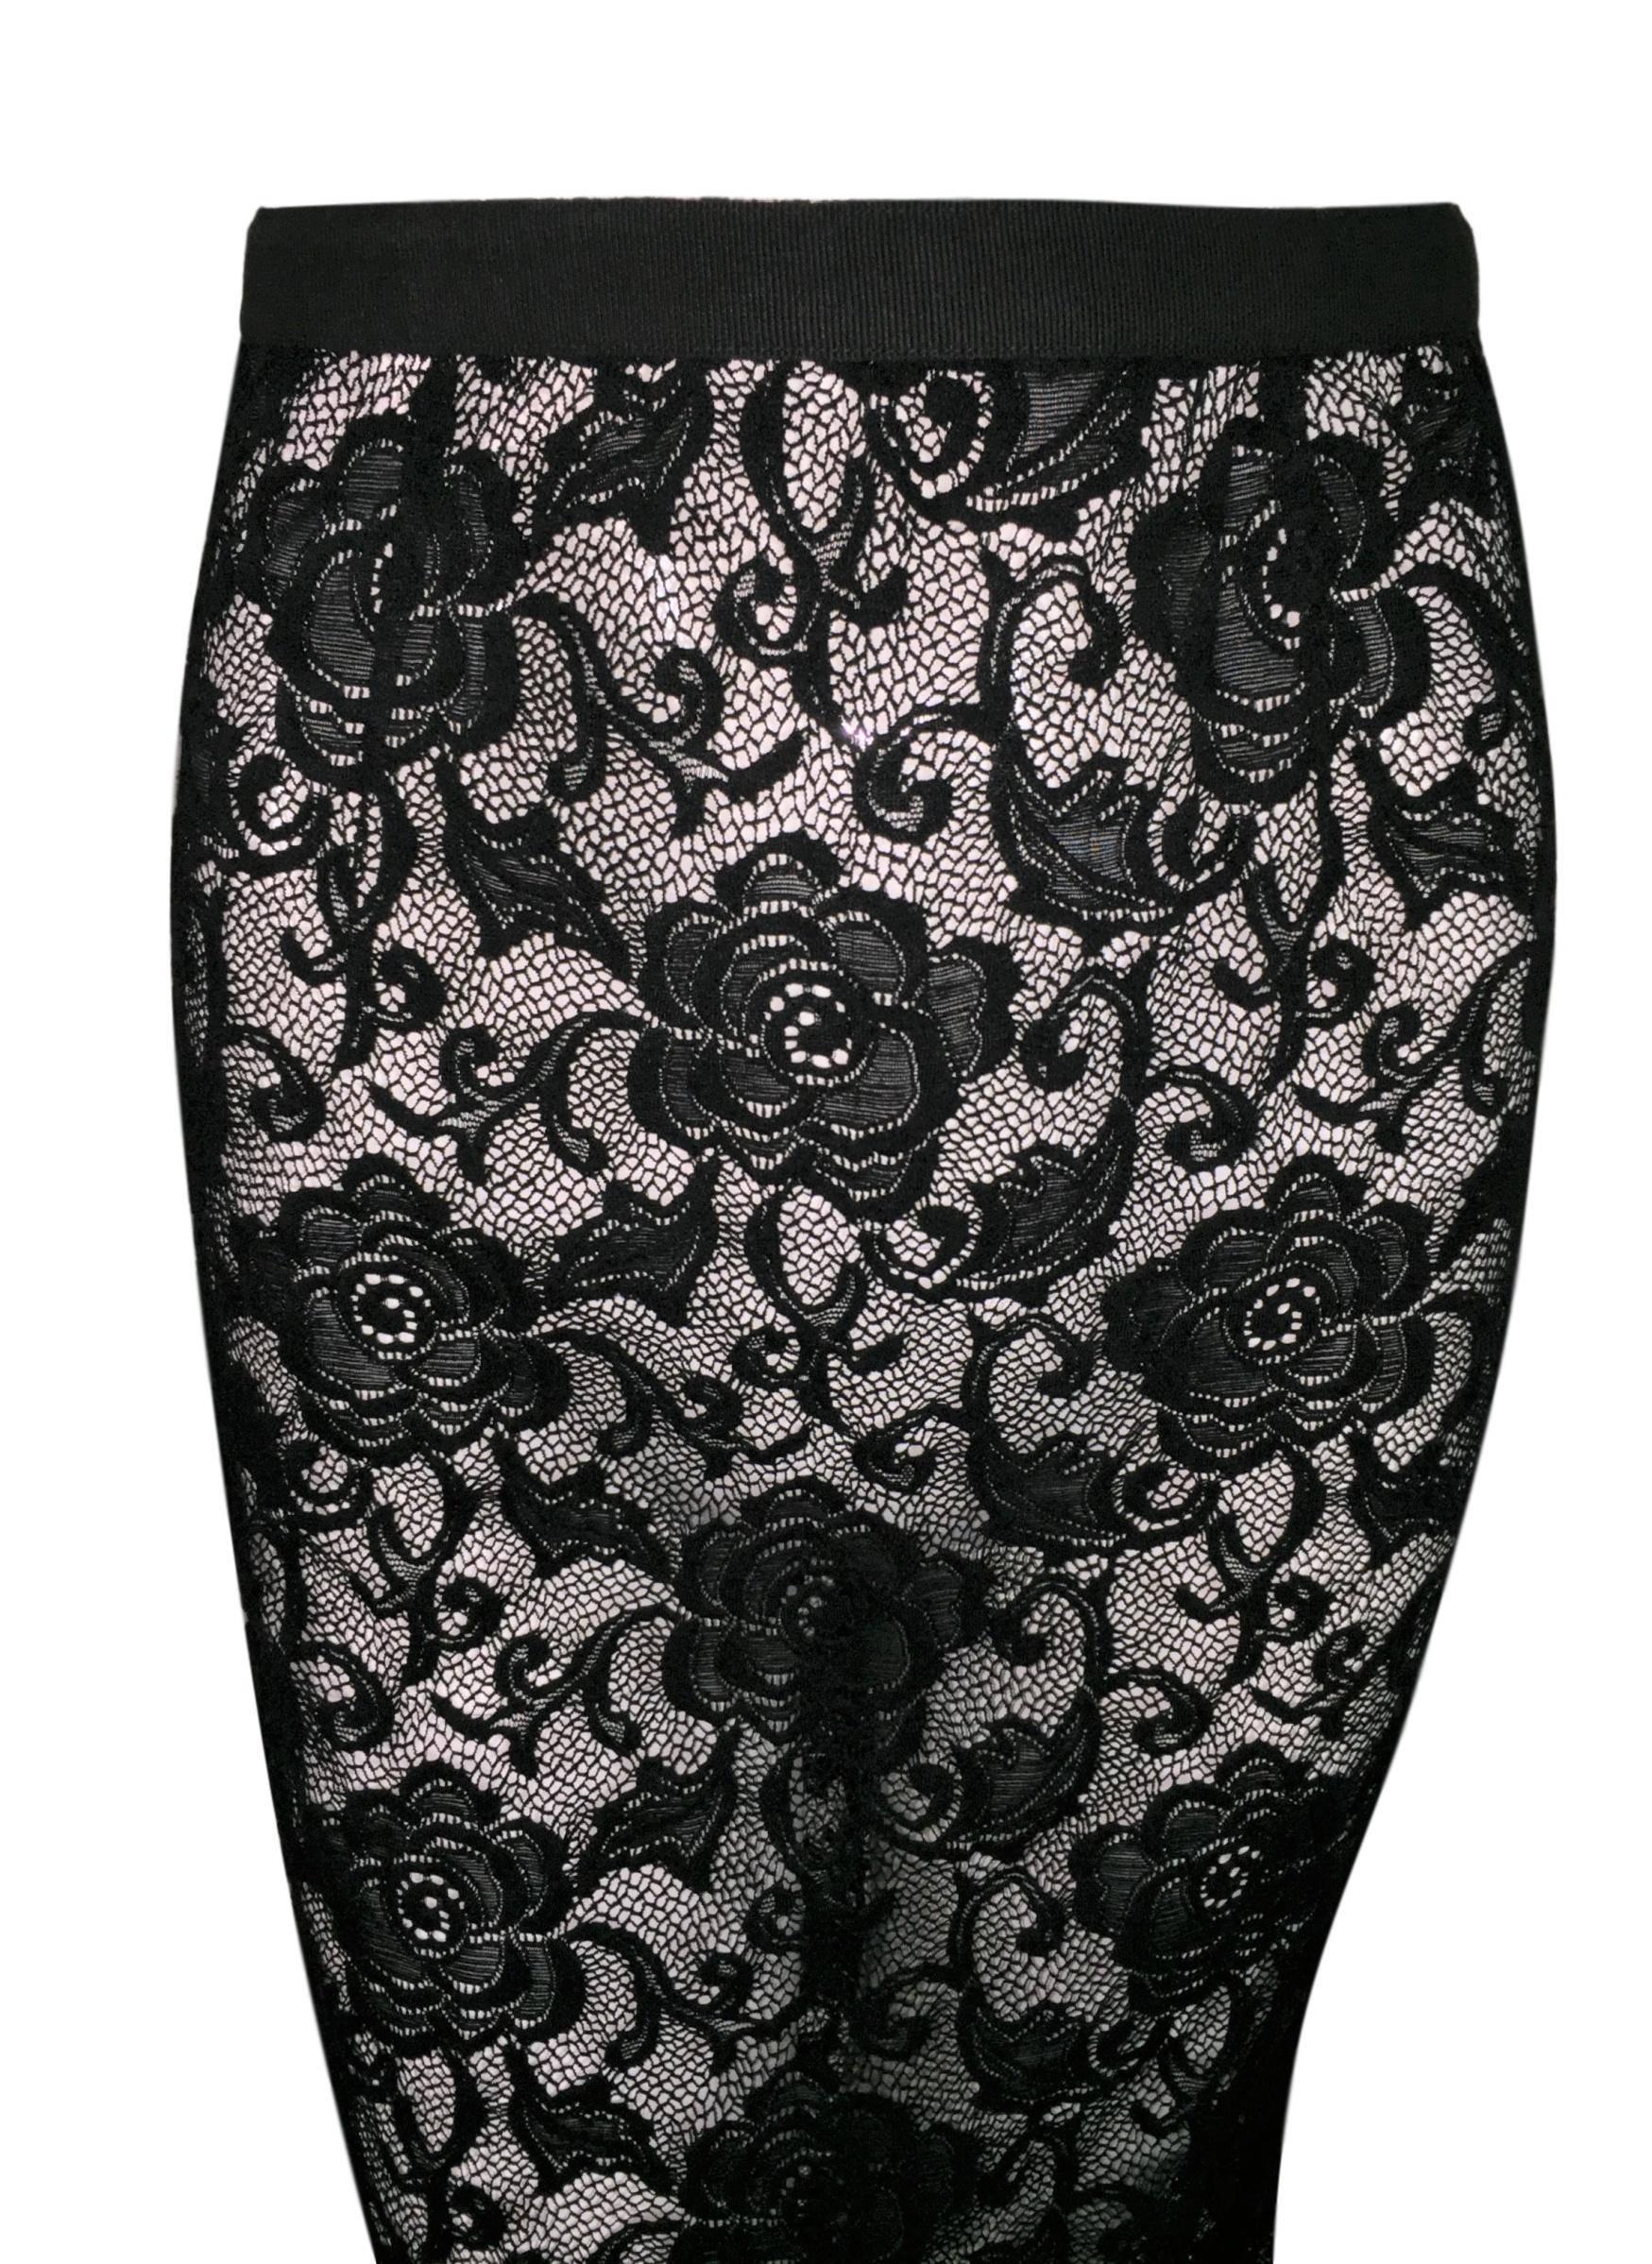 1996 Dolce & Gabbana Black Lace Silk Bra Top & Sheer Lace Mesh Pencil Skirt In Excellent Condition In Yukon, OK